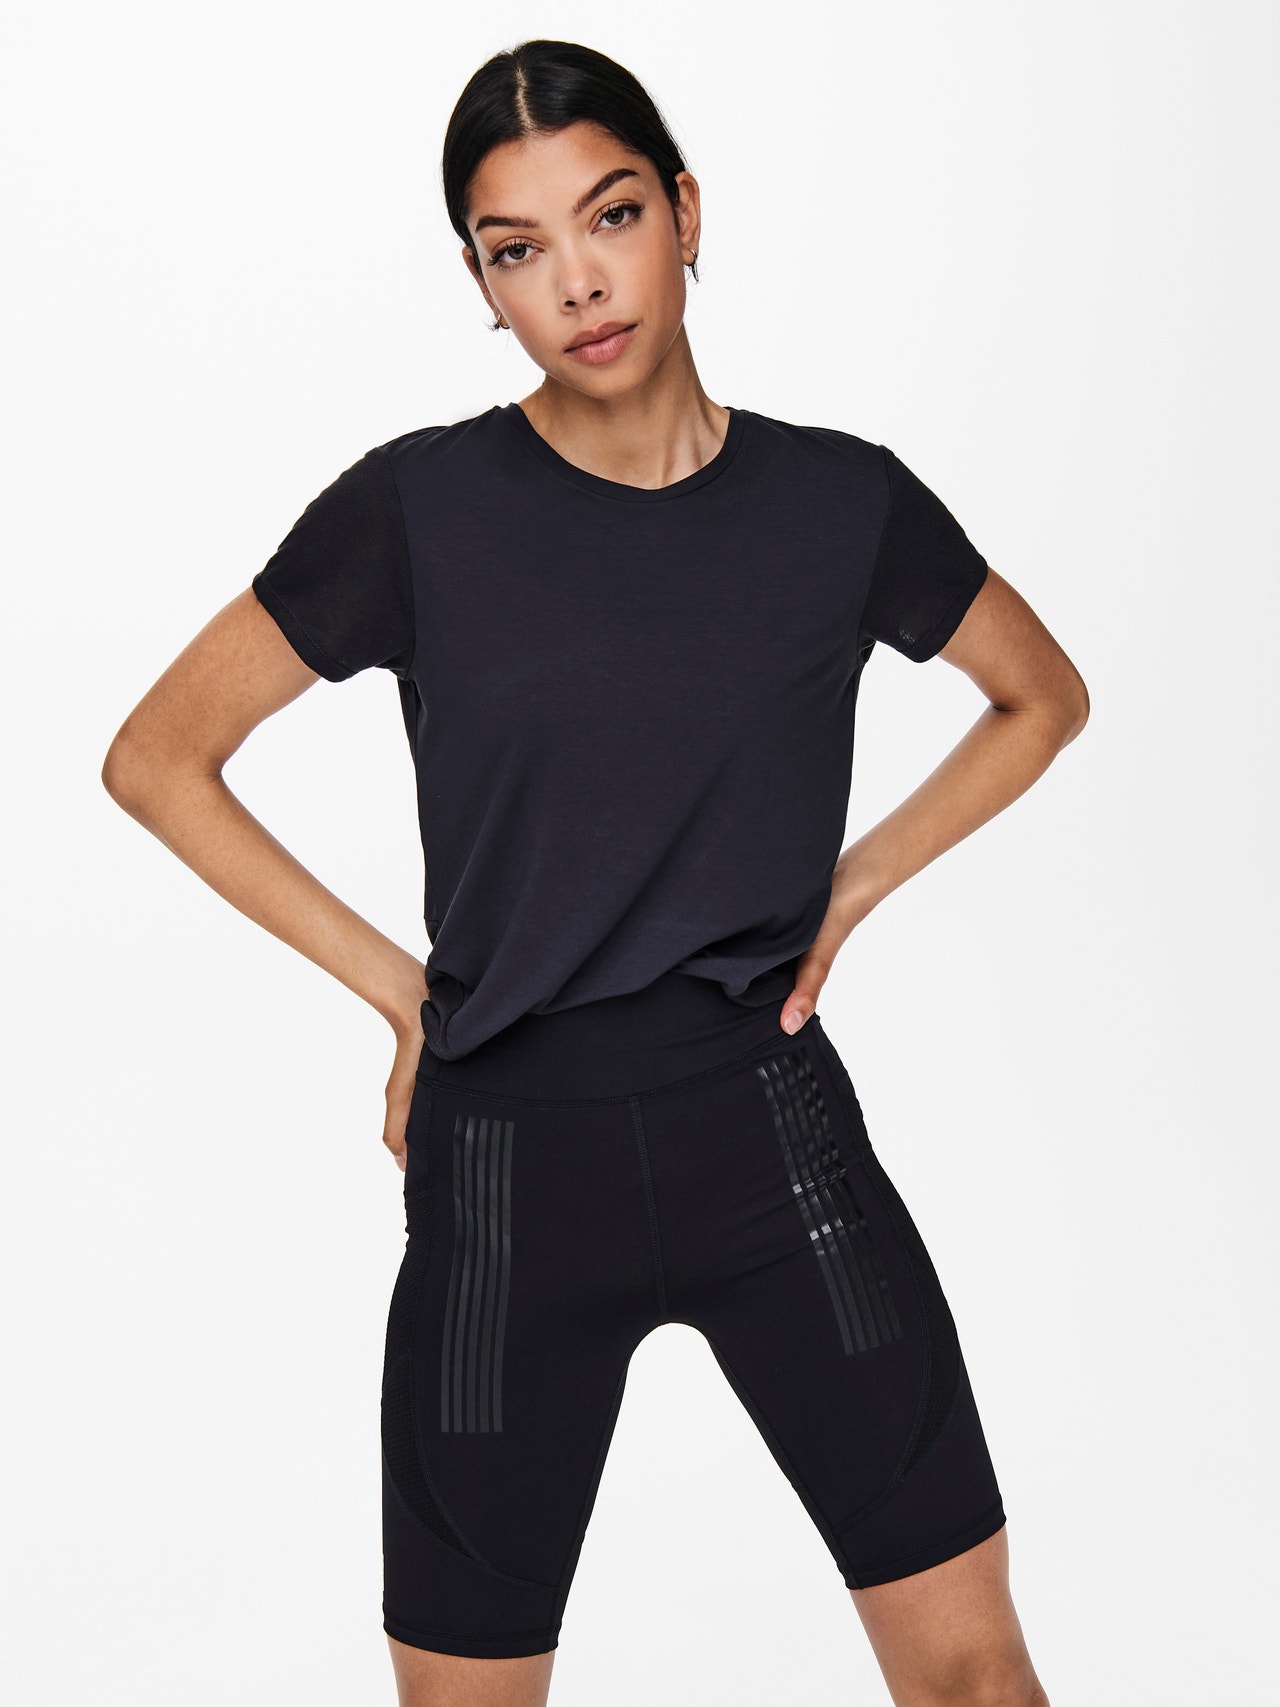 ONLY Oversize Cropped Fit Round Neck T-Shirt -Blue Graphite - 15217863